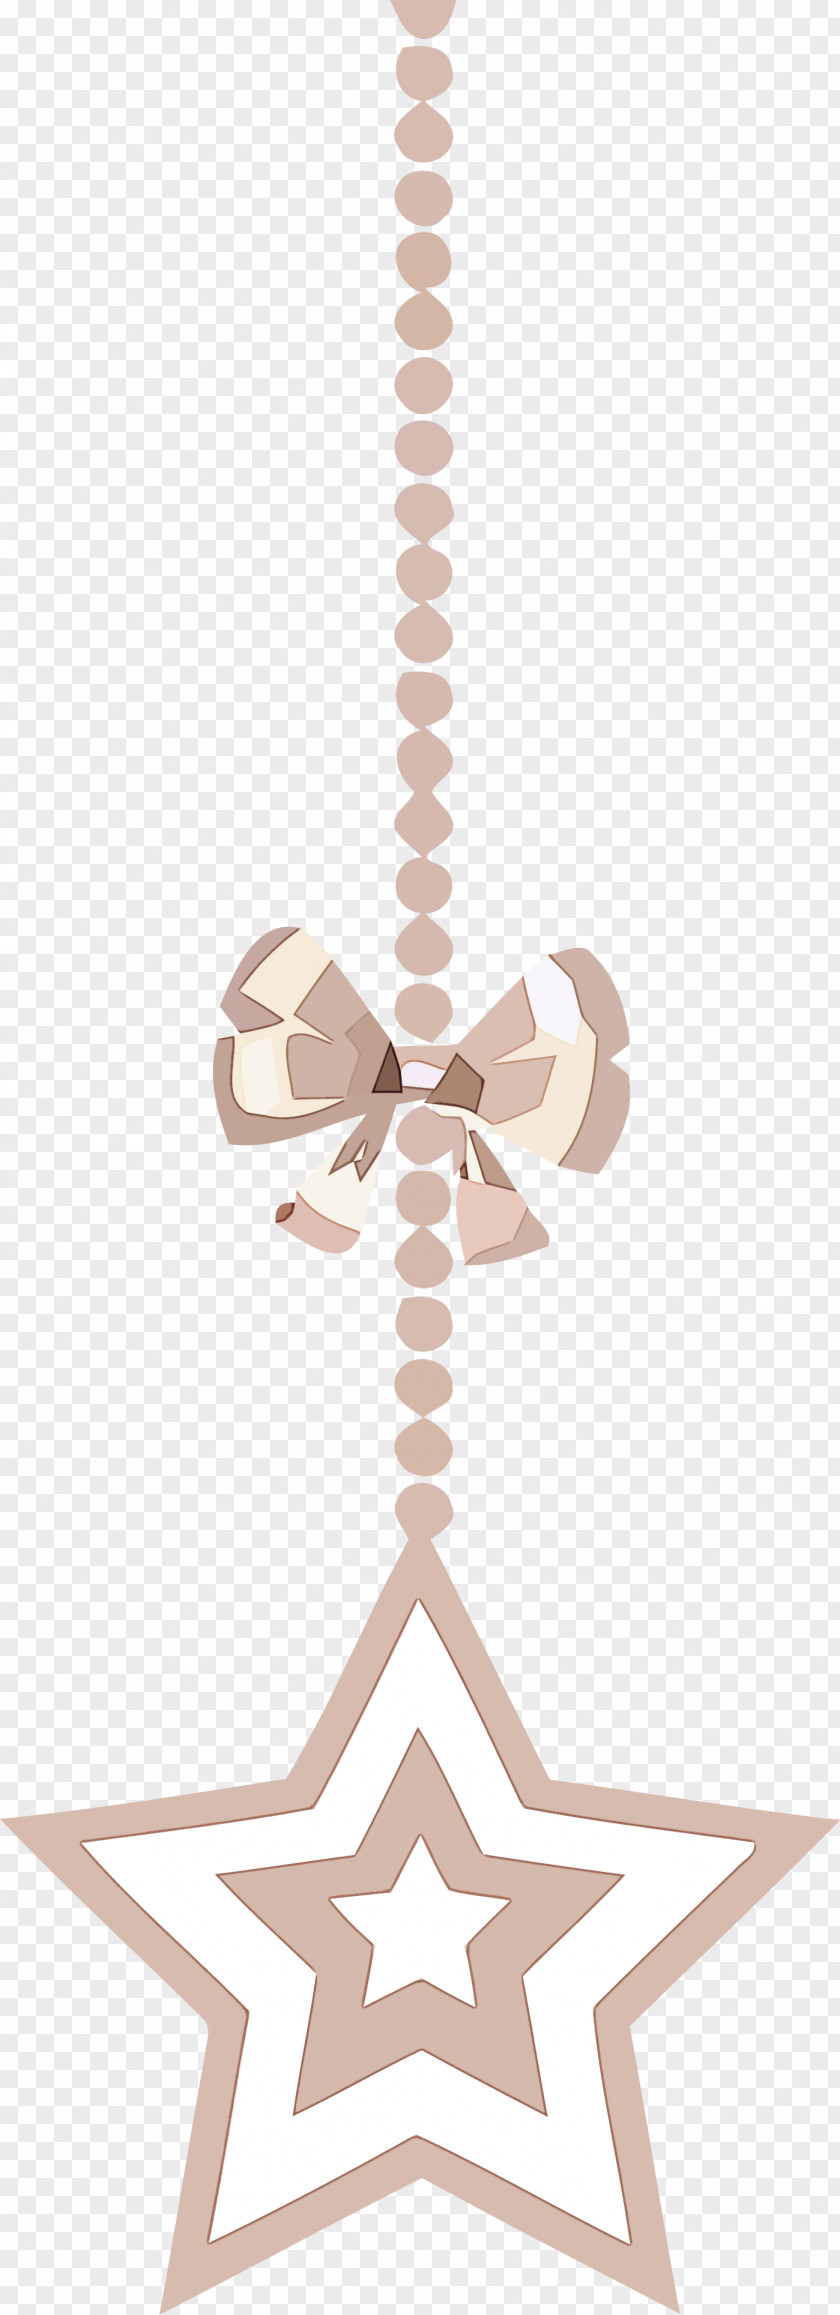 Christmas Star Ornament Ornaments PNG